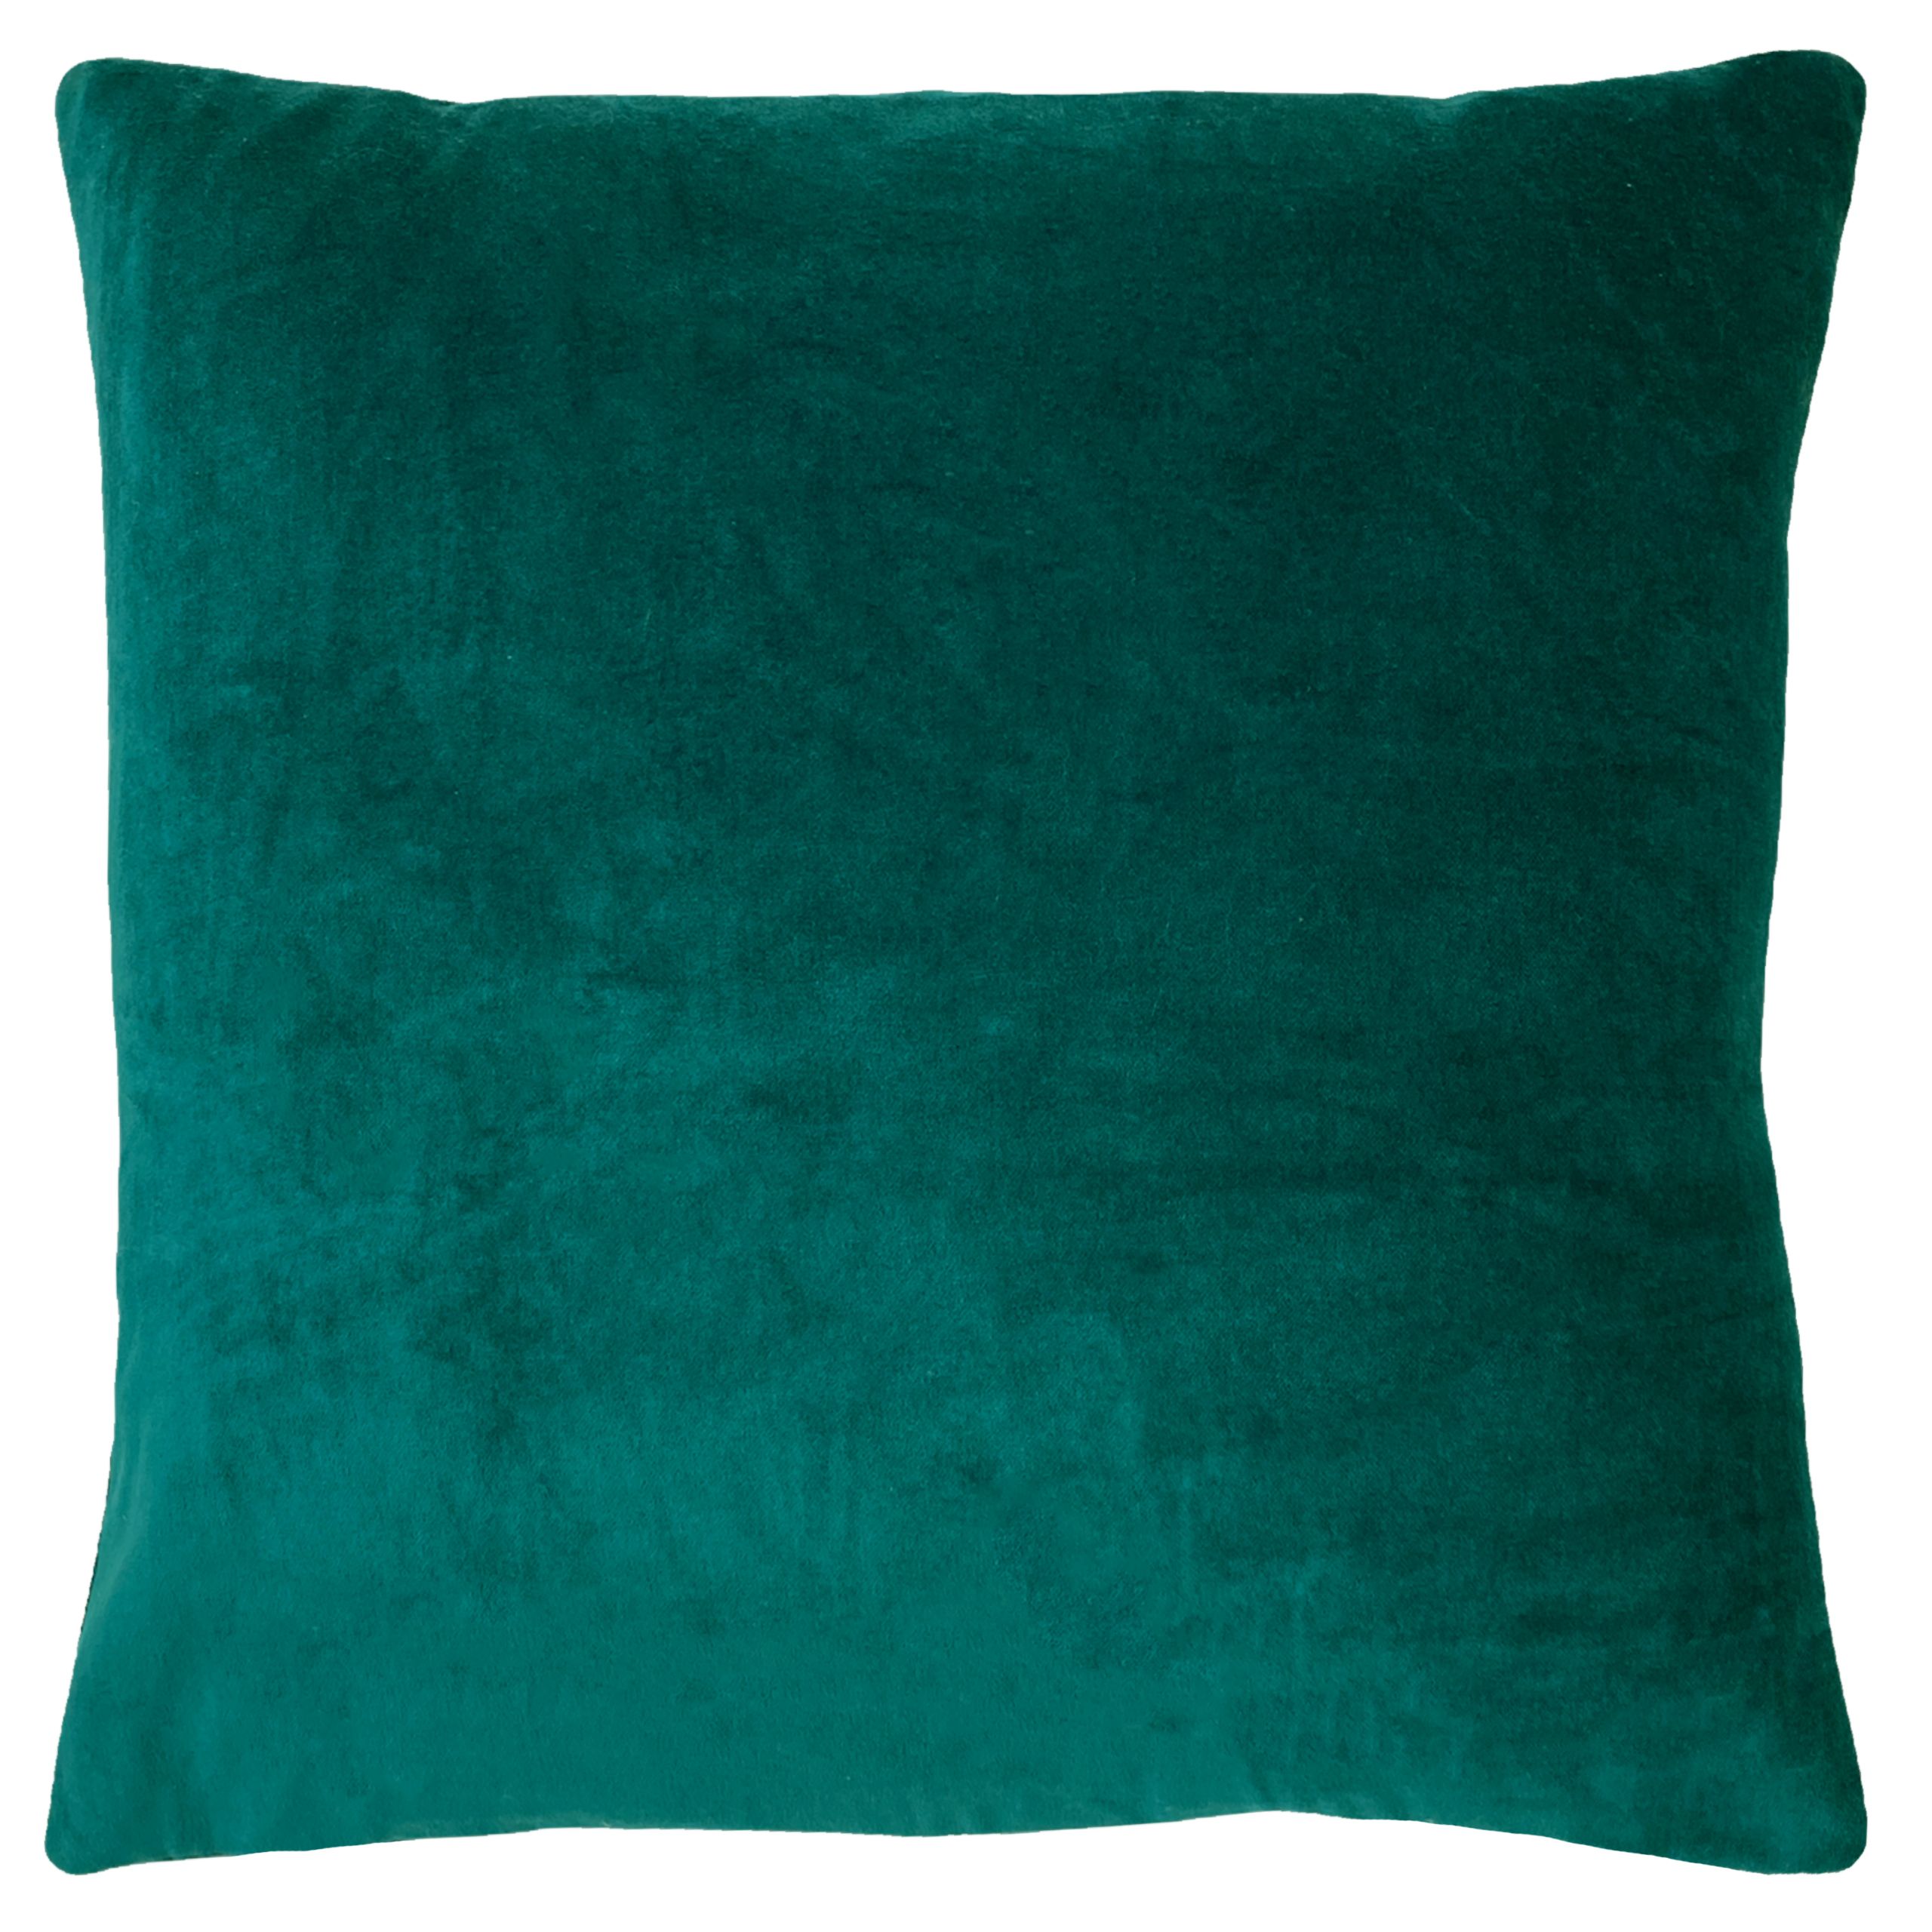 Features a linear pleated design in soft, cotton velvet which is available in a variety of beautiful colours. Complete with standard knife edging and hidden zip closure. Made of 100% Cotton, making this cushion super comfy and durable.